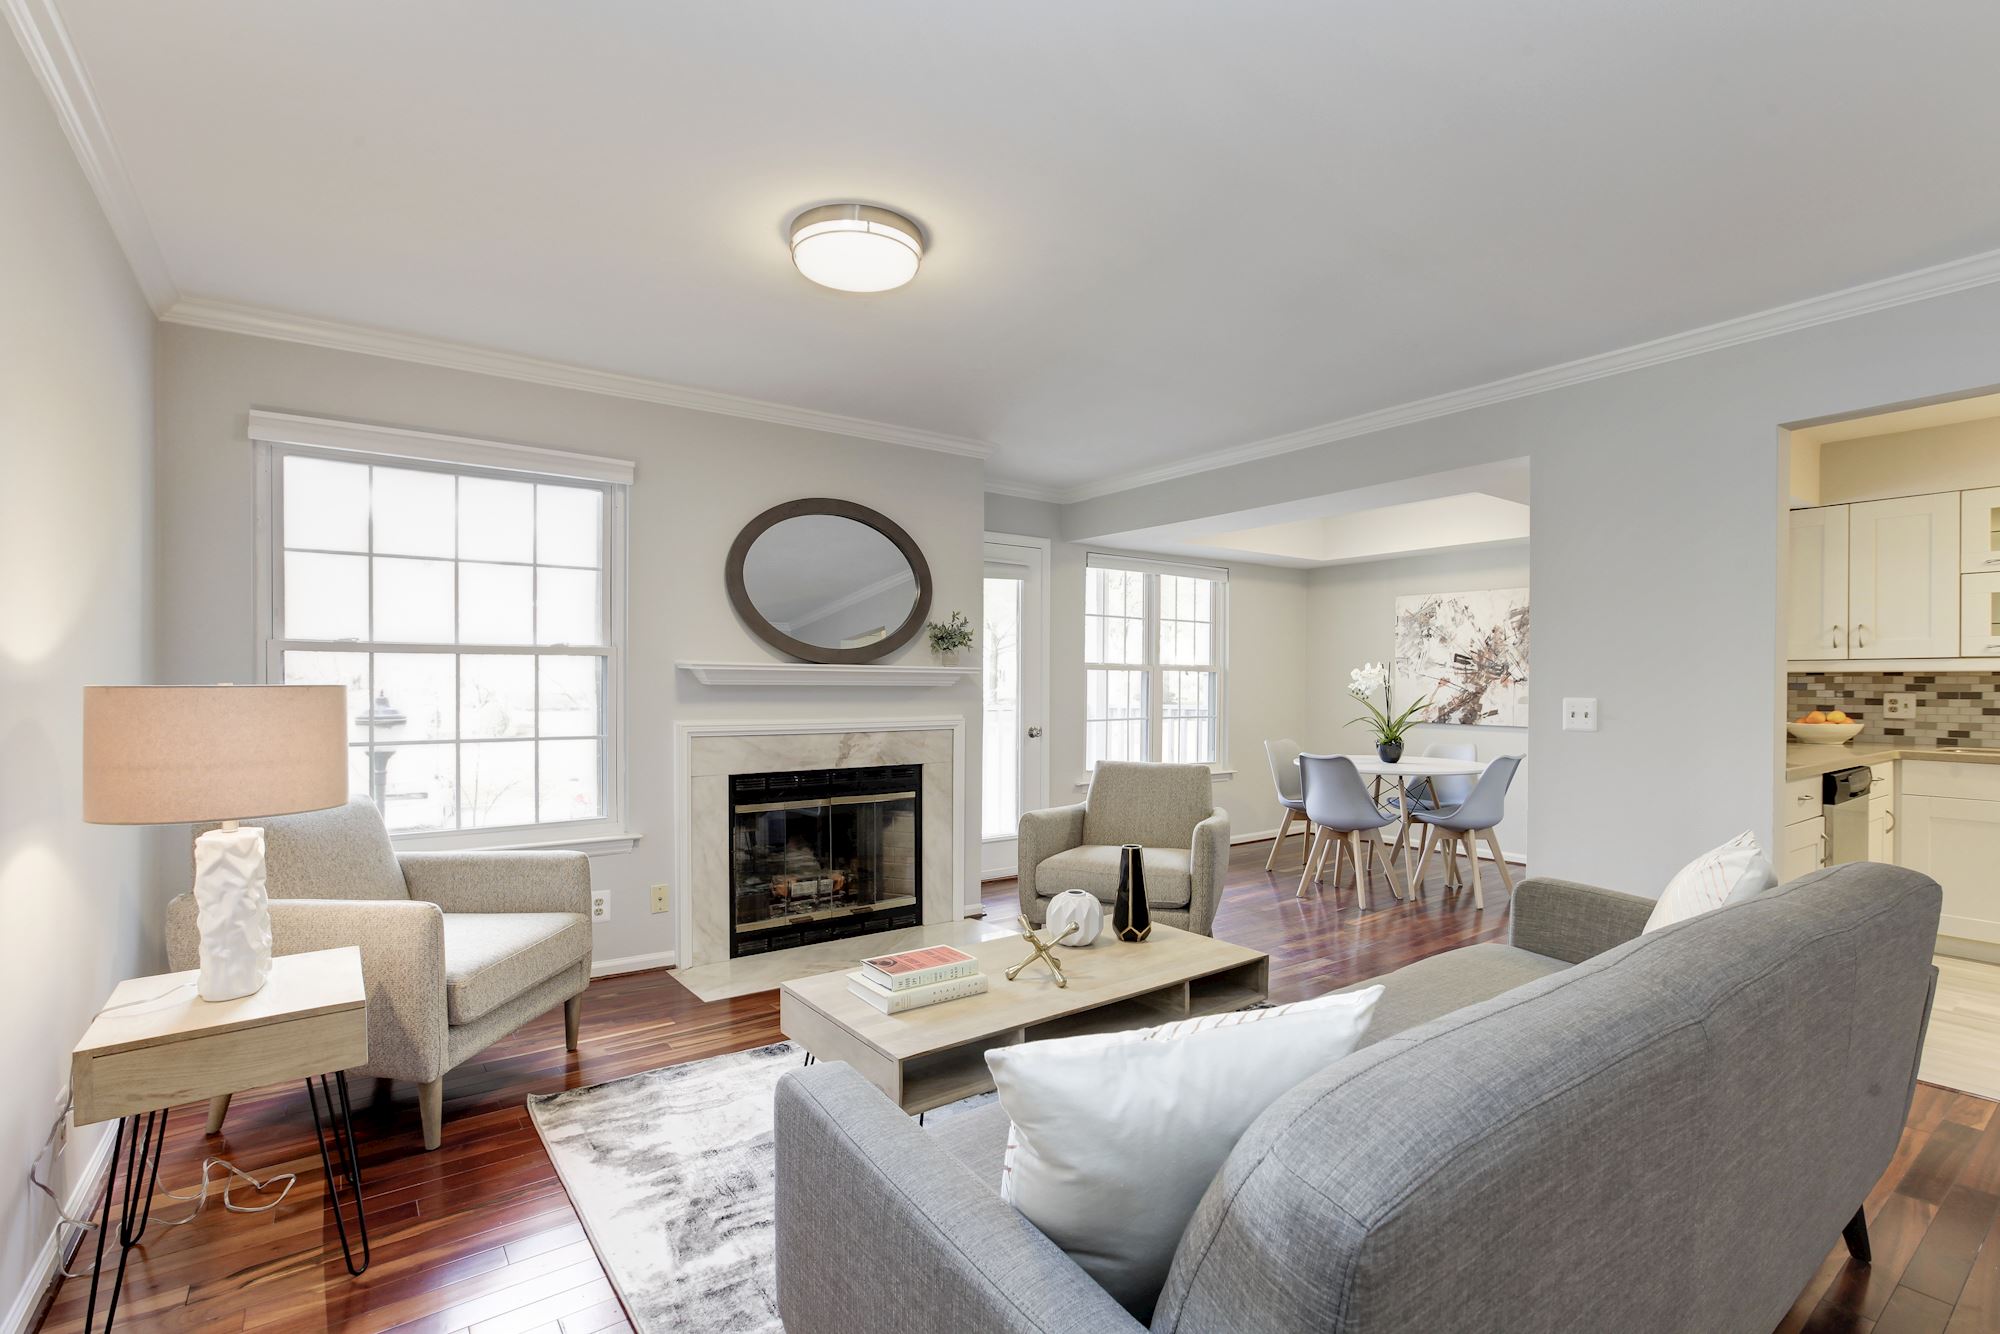 DIY Staging Services in Washington, D.C.